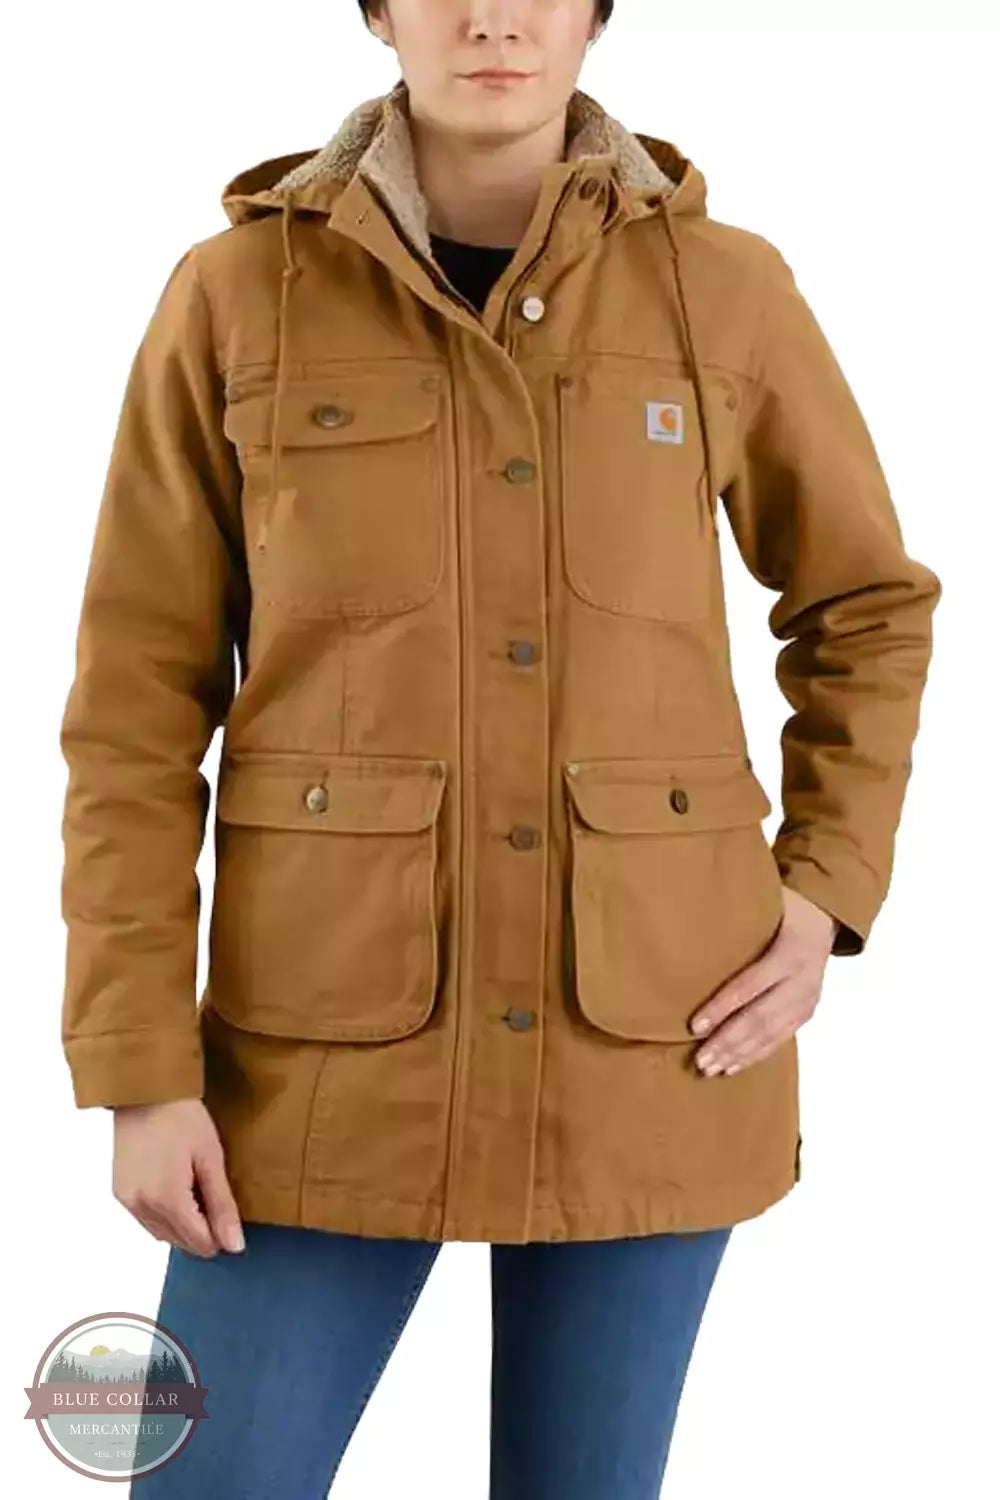 Carhartt 105512-BRN Loose Fit Washed Duck Coat in Carhartt Brown Front View